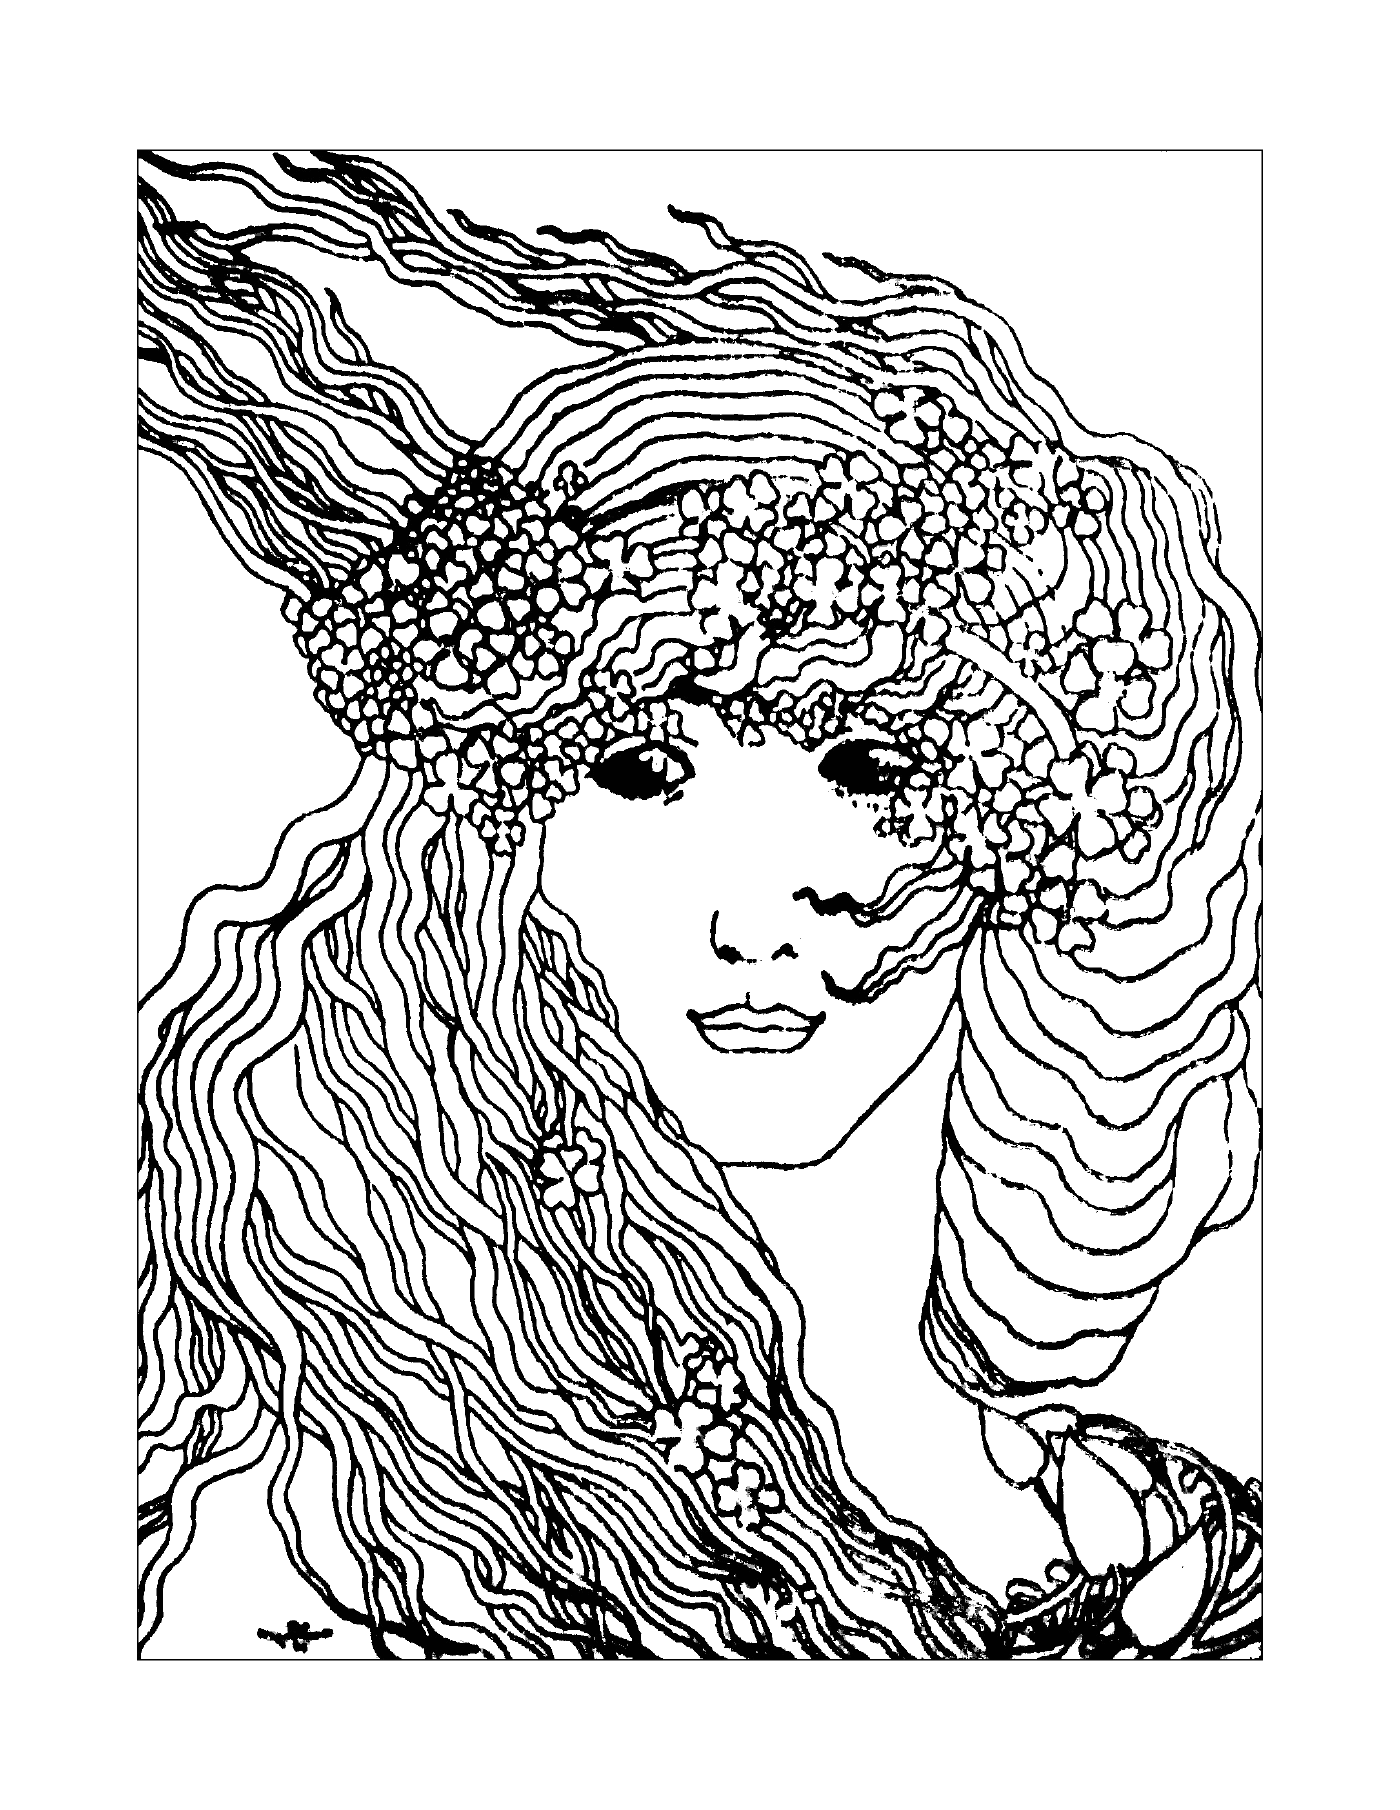  the face of a woman in the style of Aubrey Vincent Beardsley 